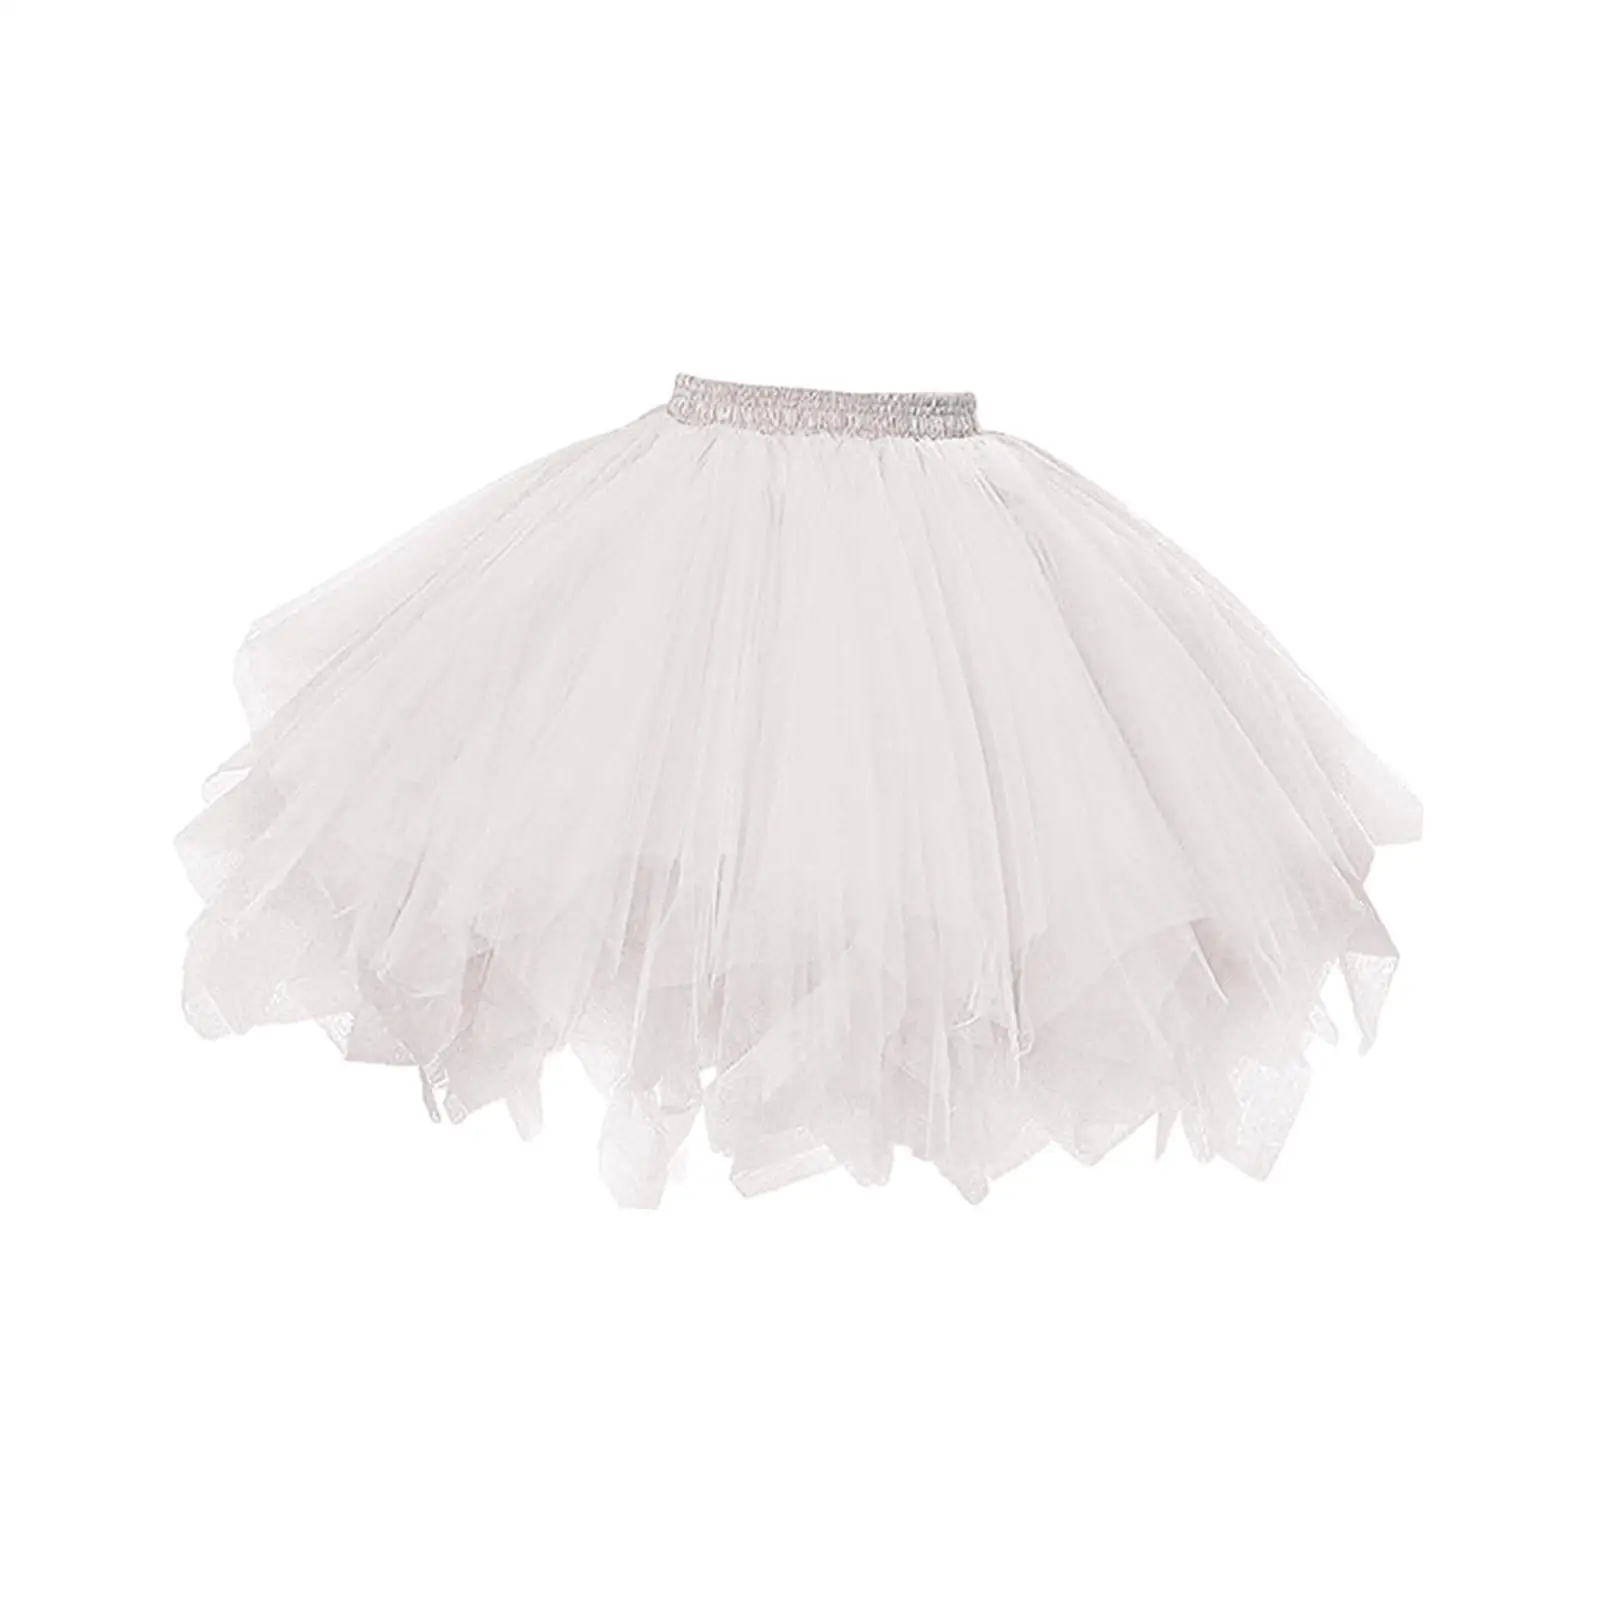 Women Tulle Tutu Skirt Layered Dress up Cosplay Classic Supplies Tulle Petticoat for Rehearsal Performance Proms Wedding Concert